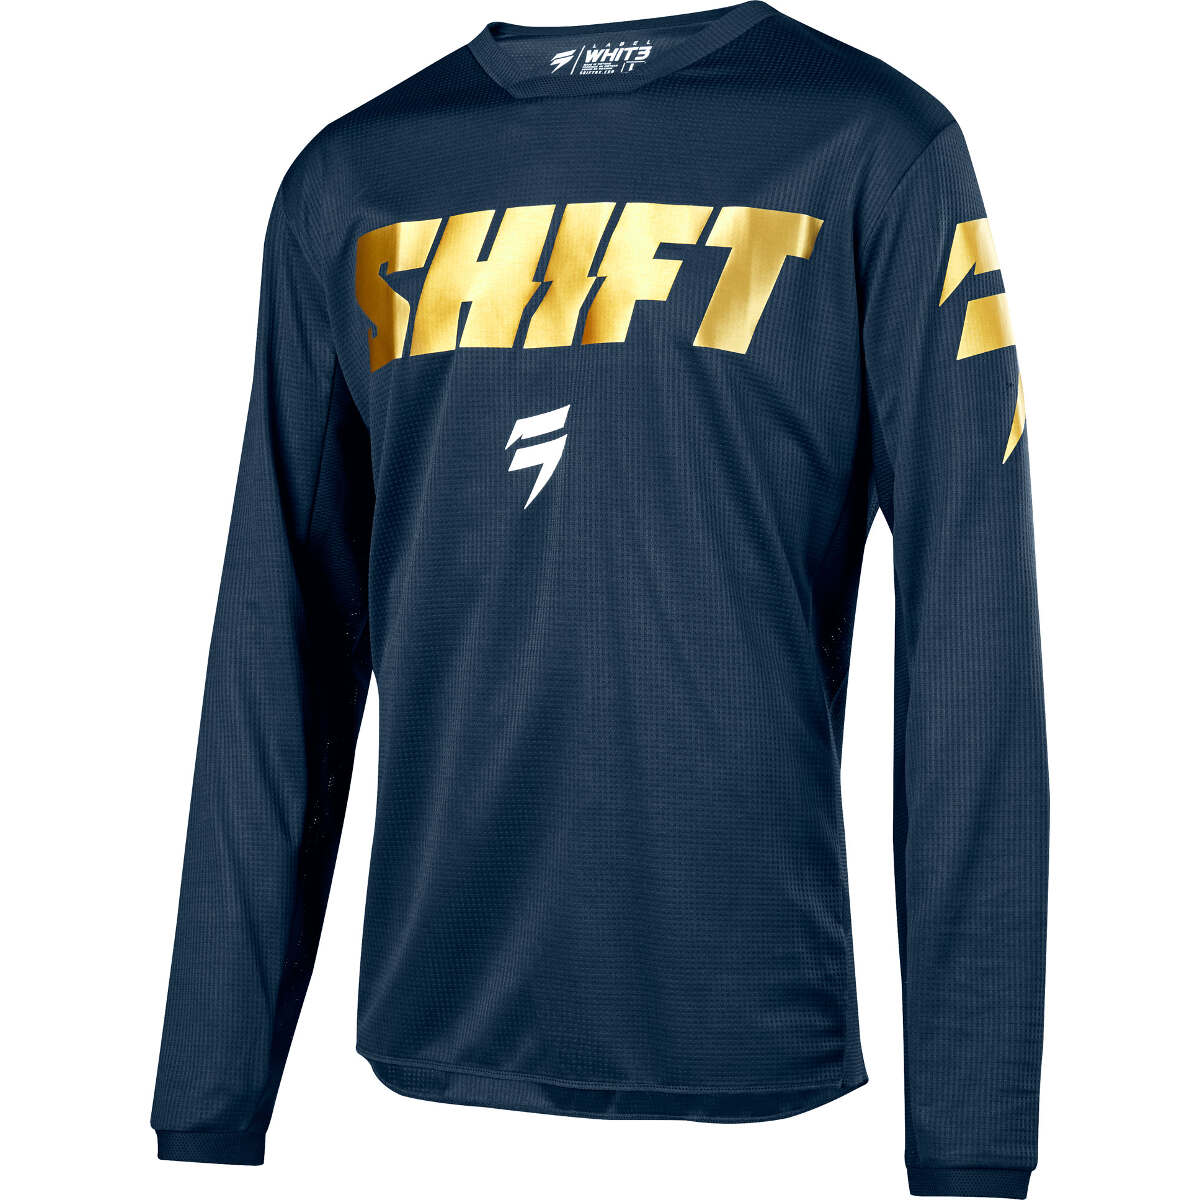 Shift Maglia MX Whit3 Label Navy/Gold - Limited Edition